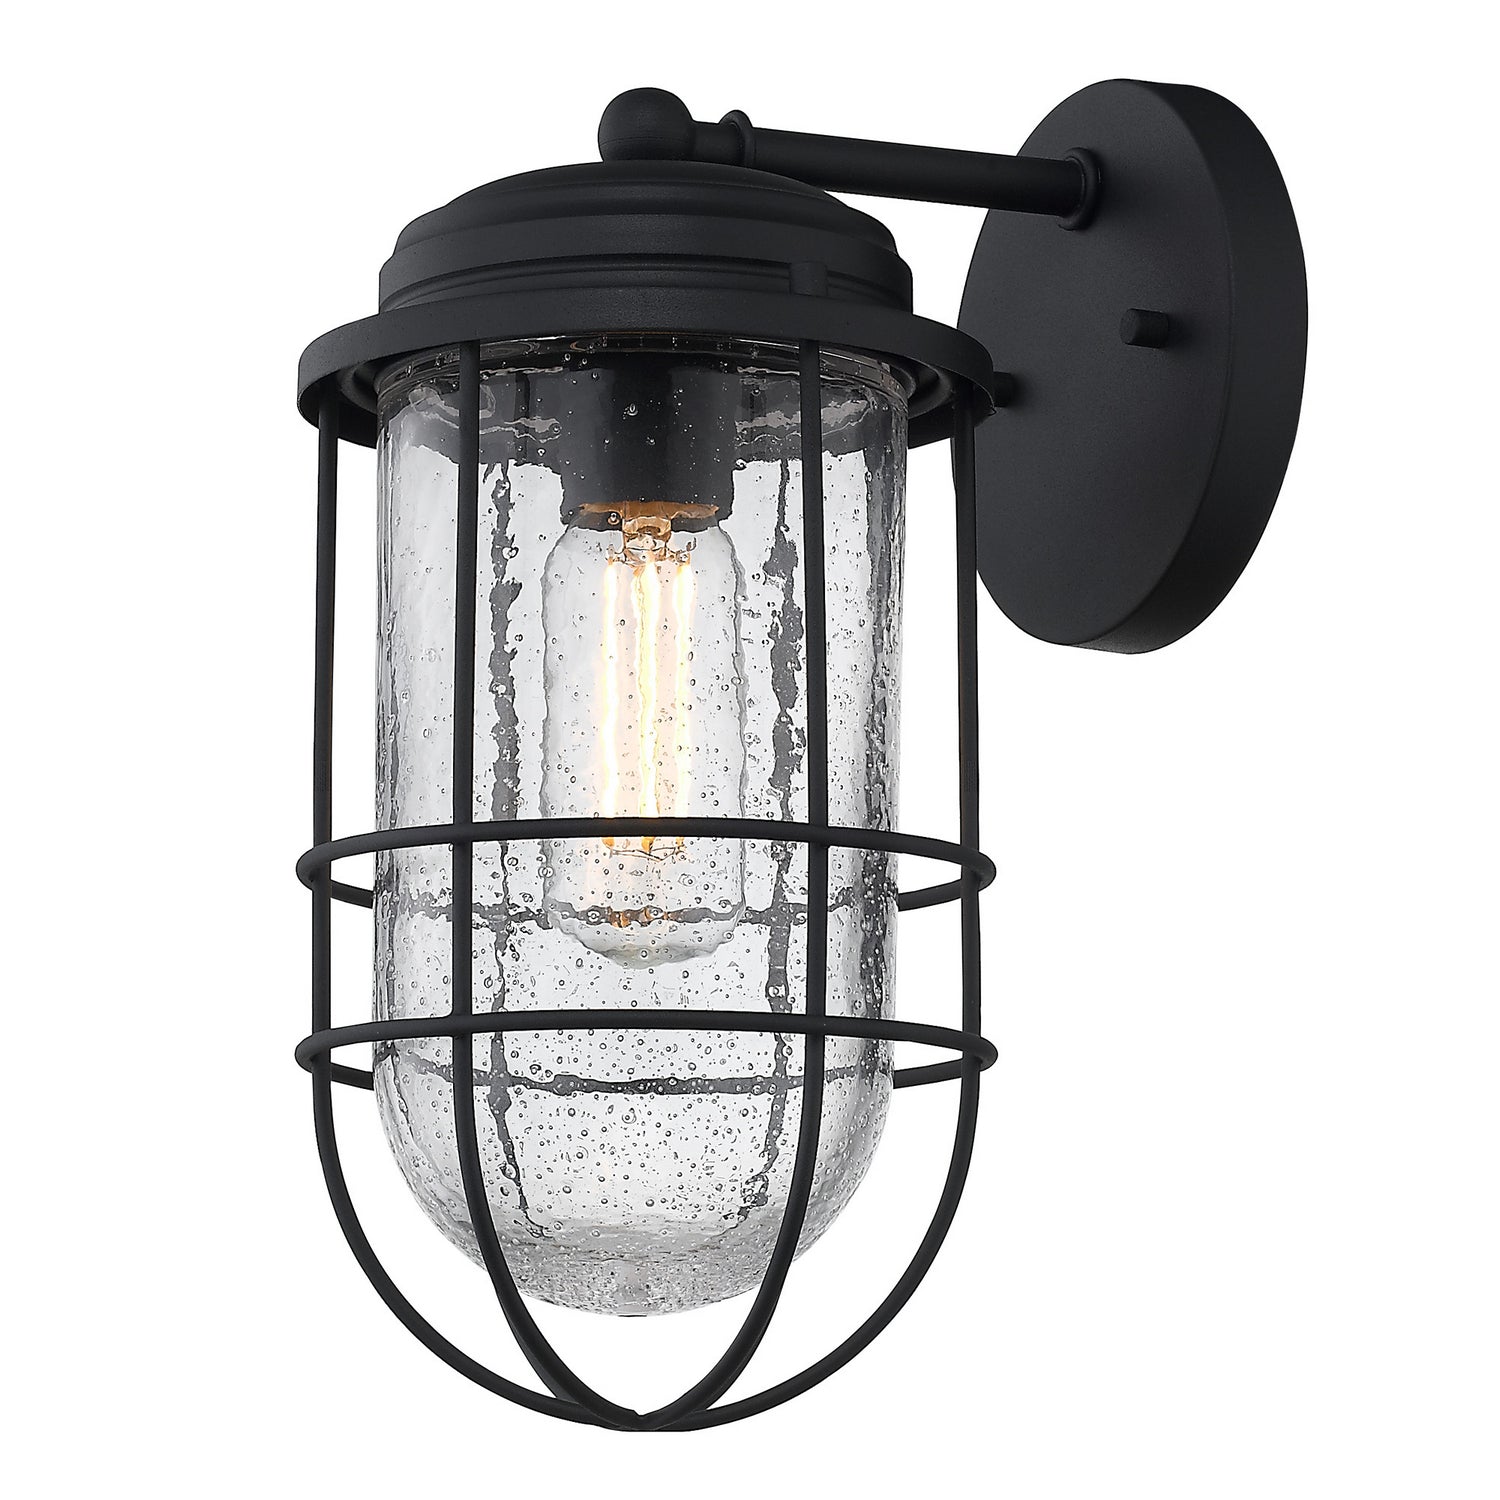 Golden - 9808-OWM NB-SD - One Light Outdoor Wall Sconce - Seaport NB - Natural Black